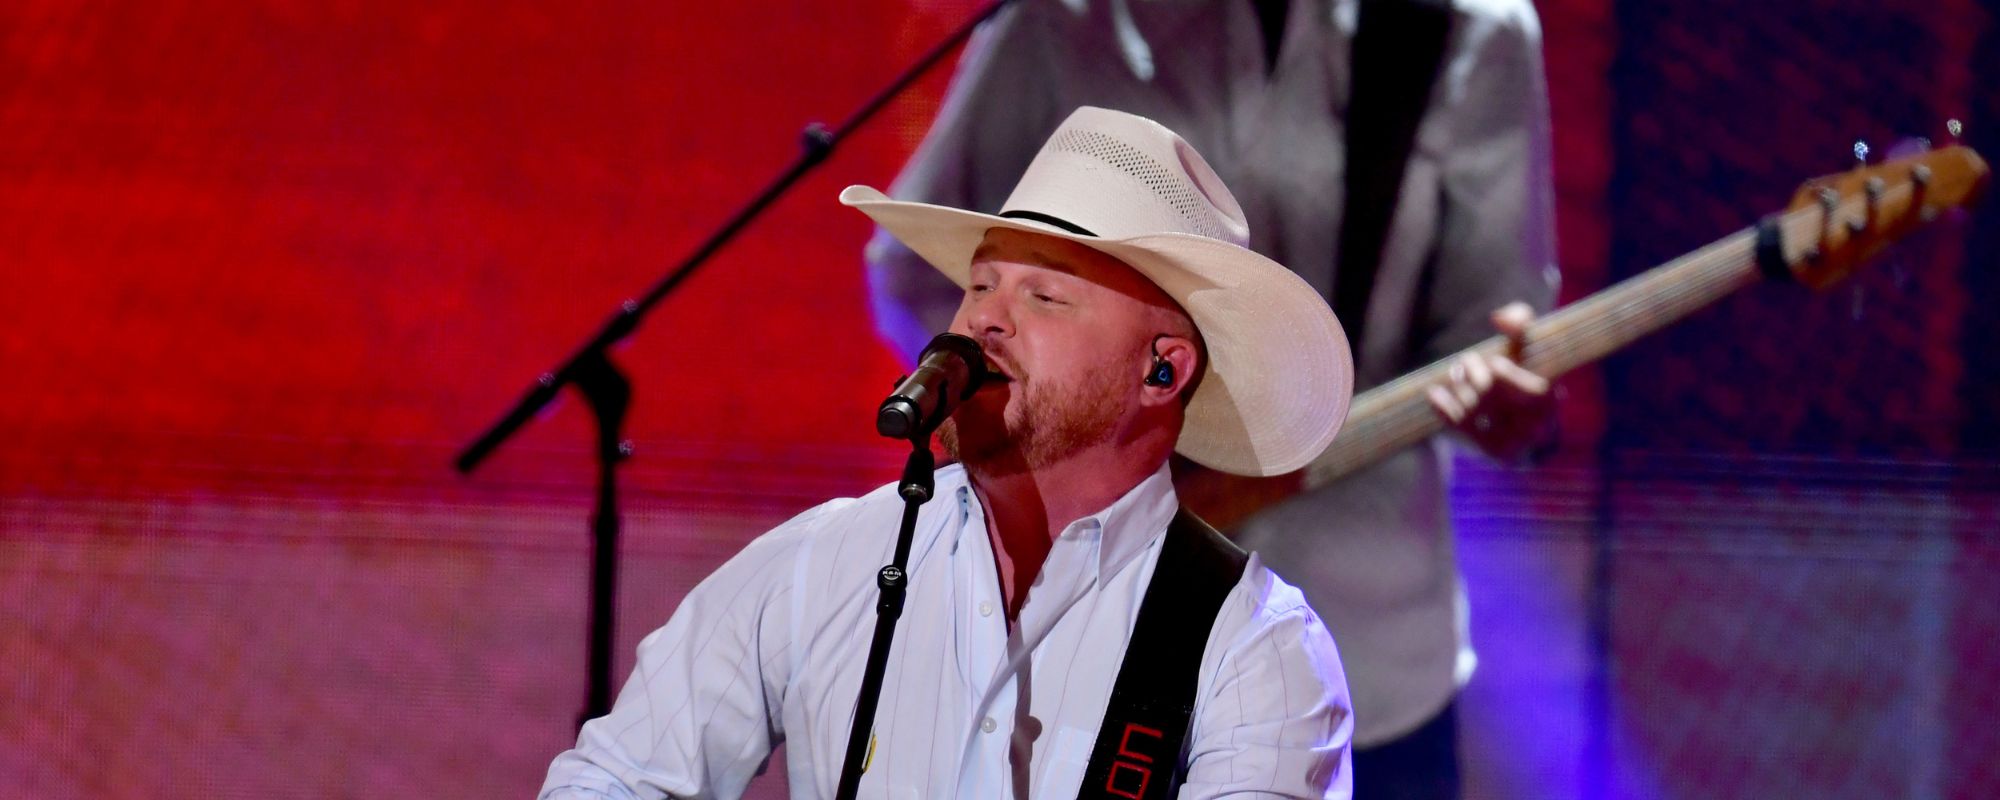 Cody Johnson Keeps It Simple With ACM Performance of 'Dirt Cheap'